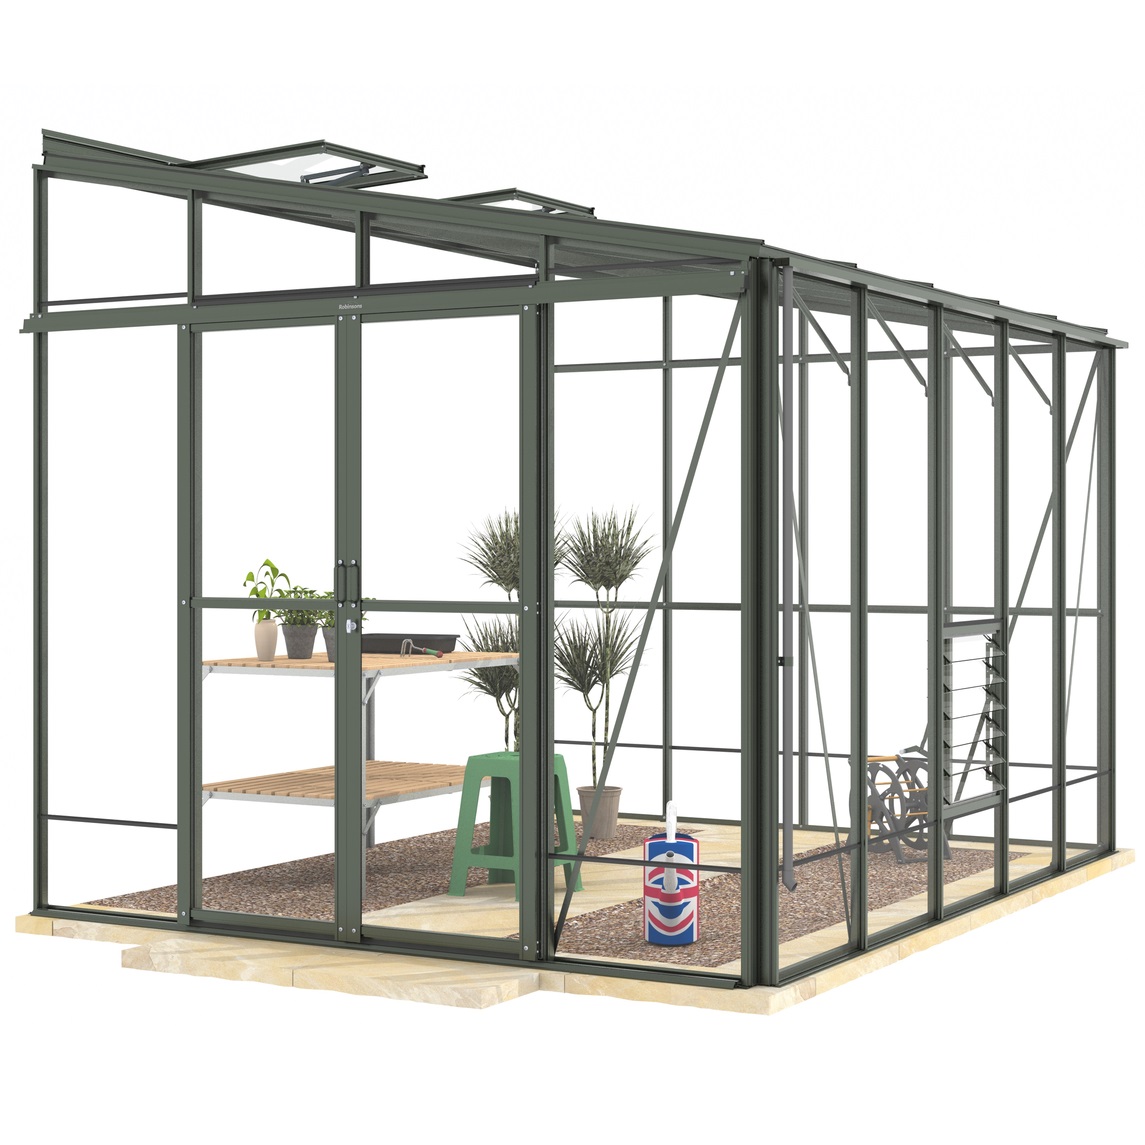 Robinsons Lean To Eight 8′ x 10′ Greenhouse Powder Coated